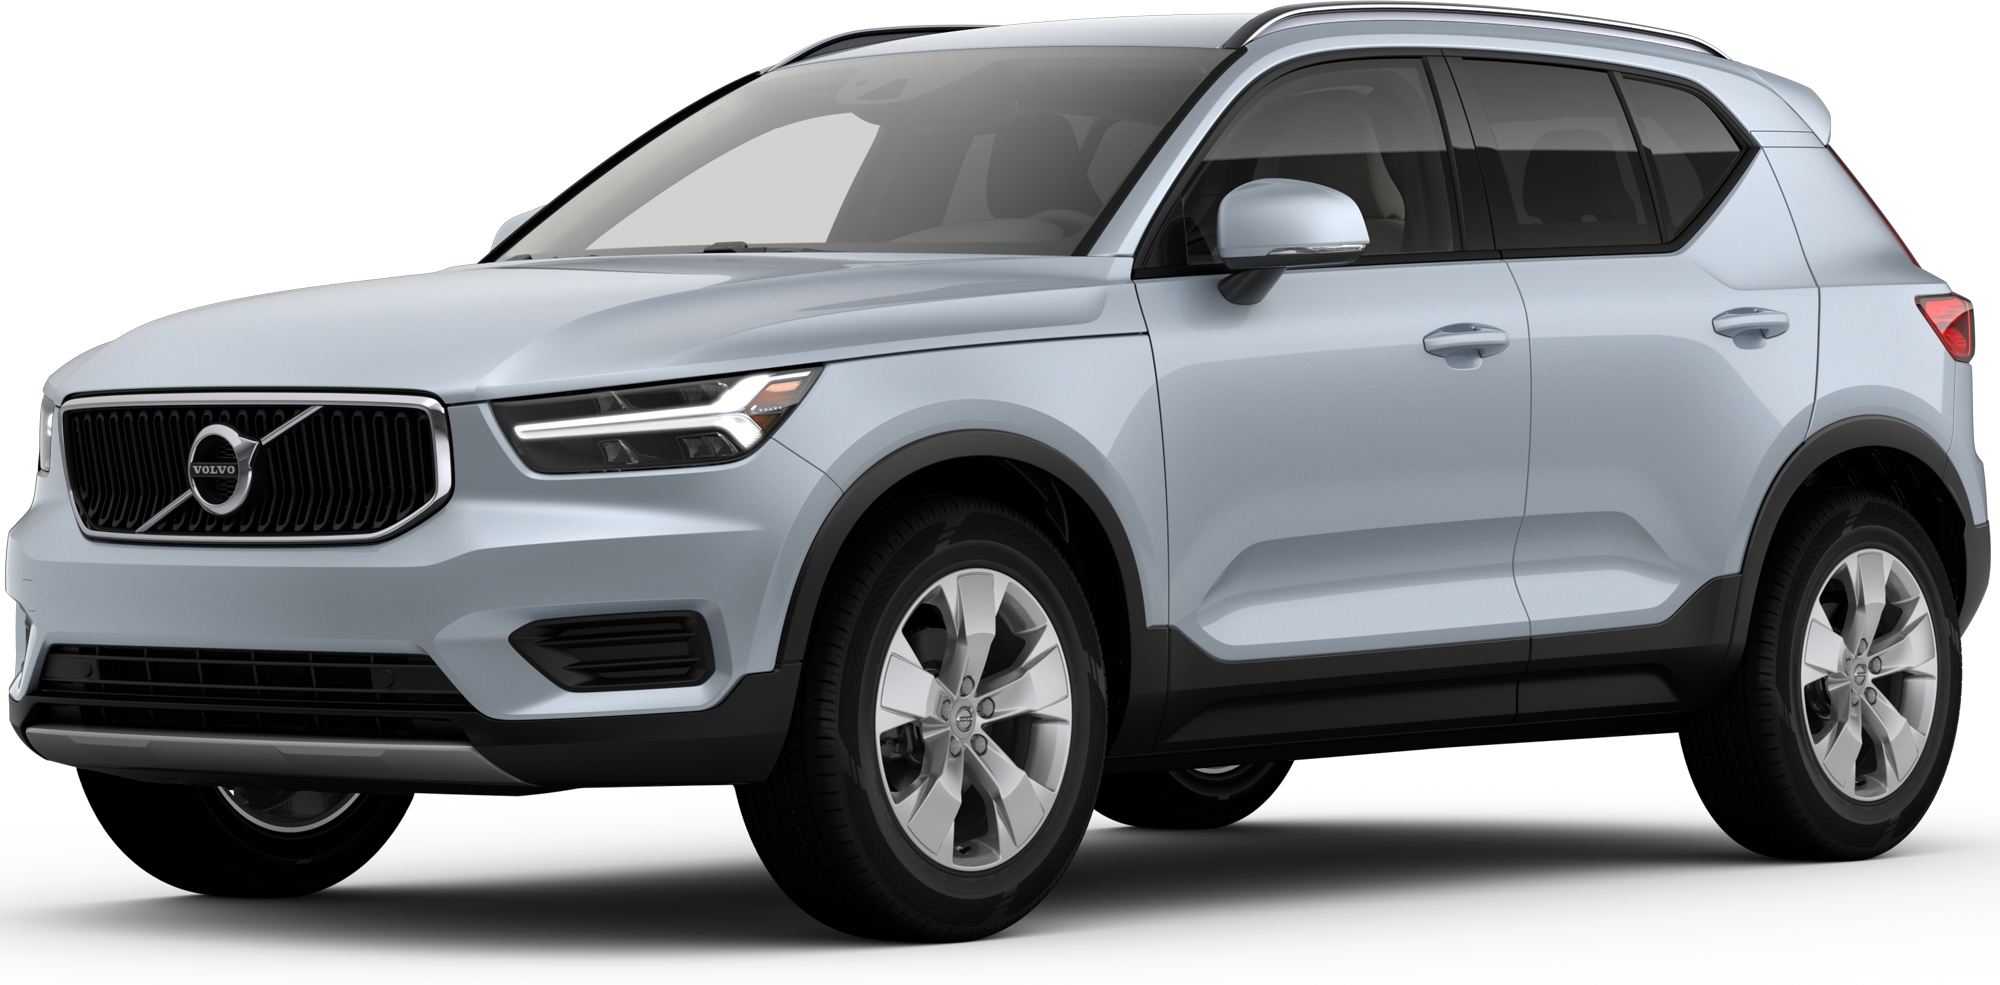 2022 Volvo XC40 Incentives, Specials & Offers in Littleton CO